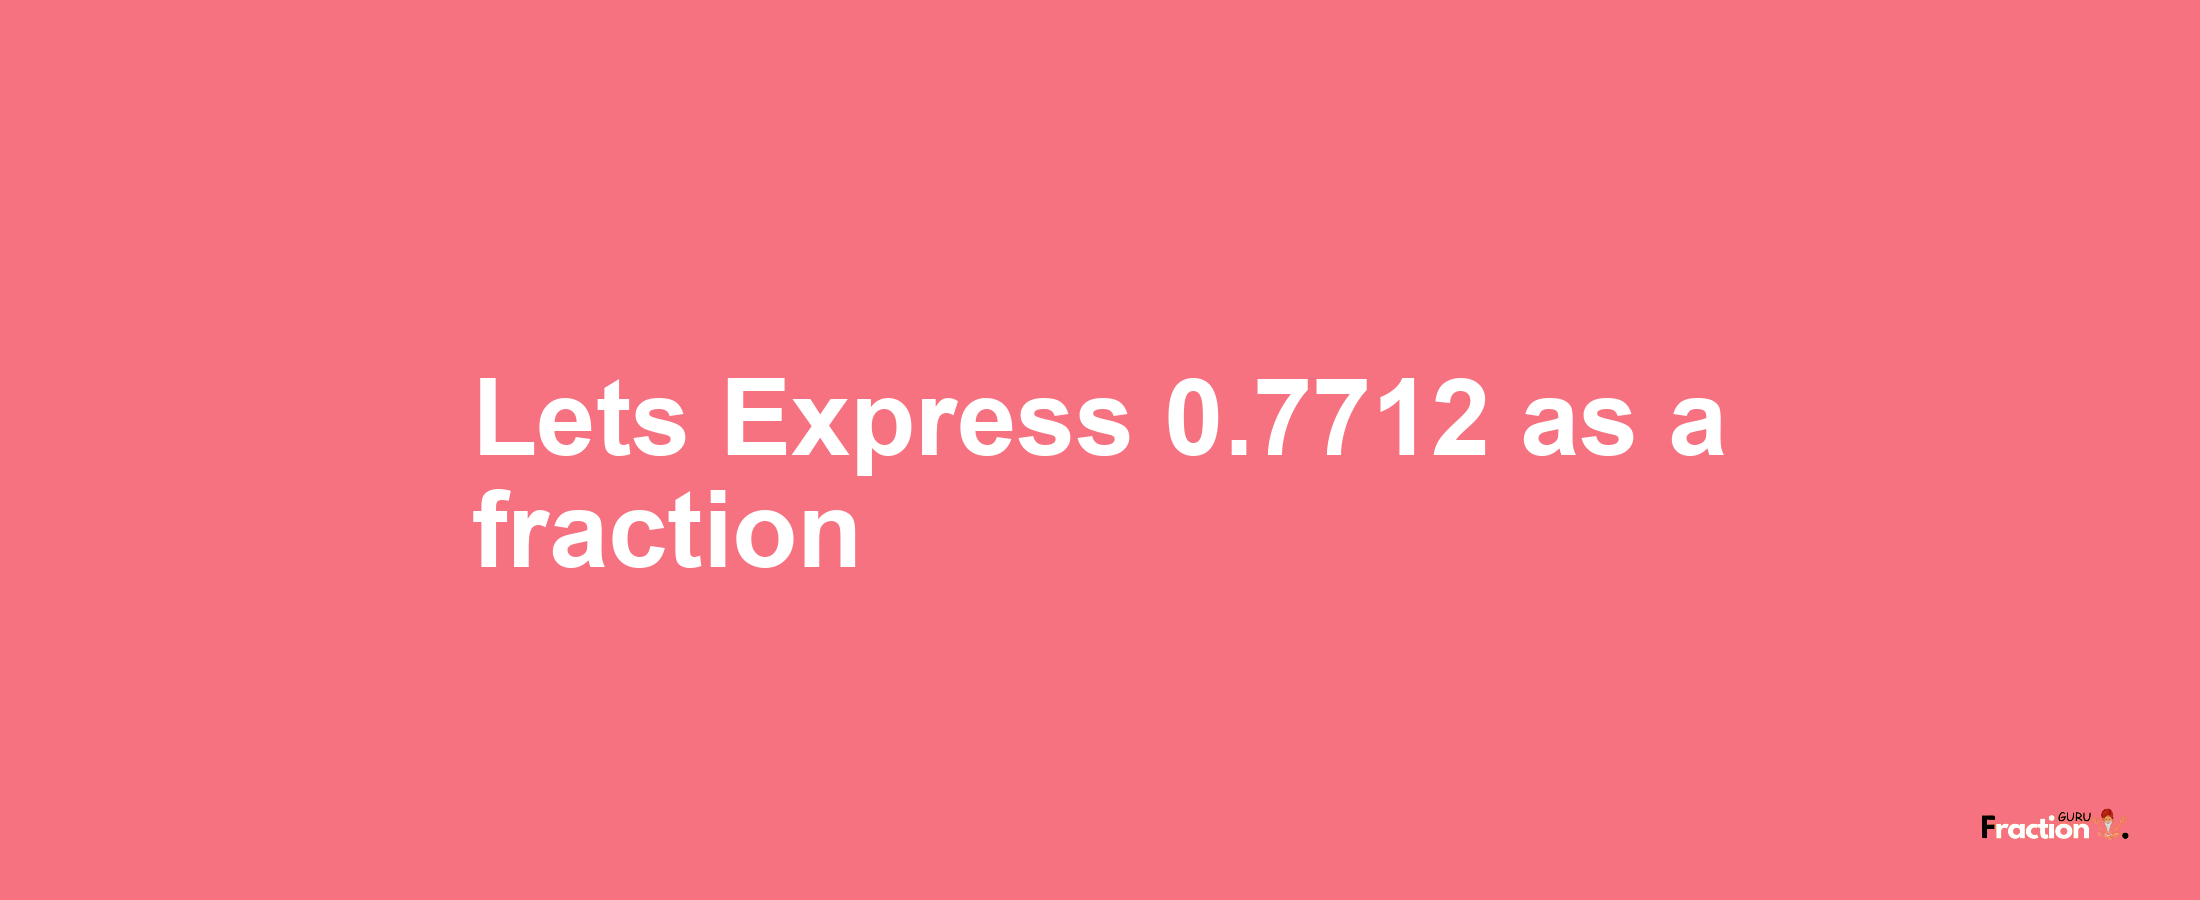 Lets Express 0.7712 as afraction